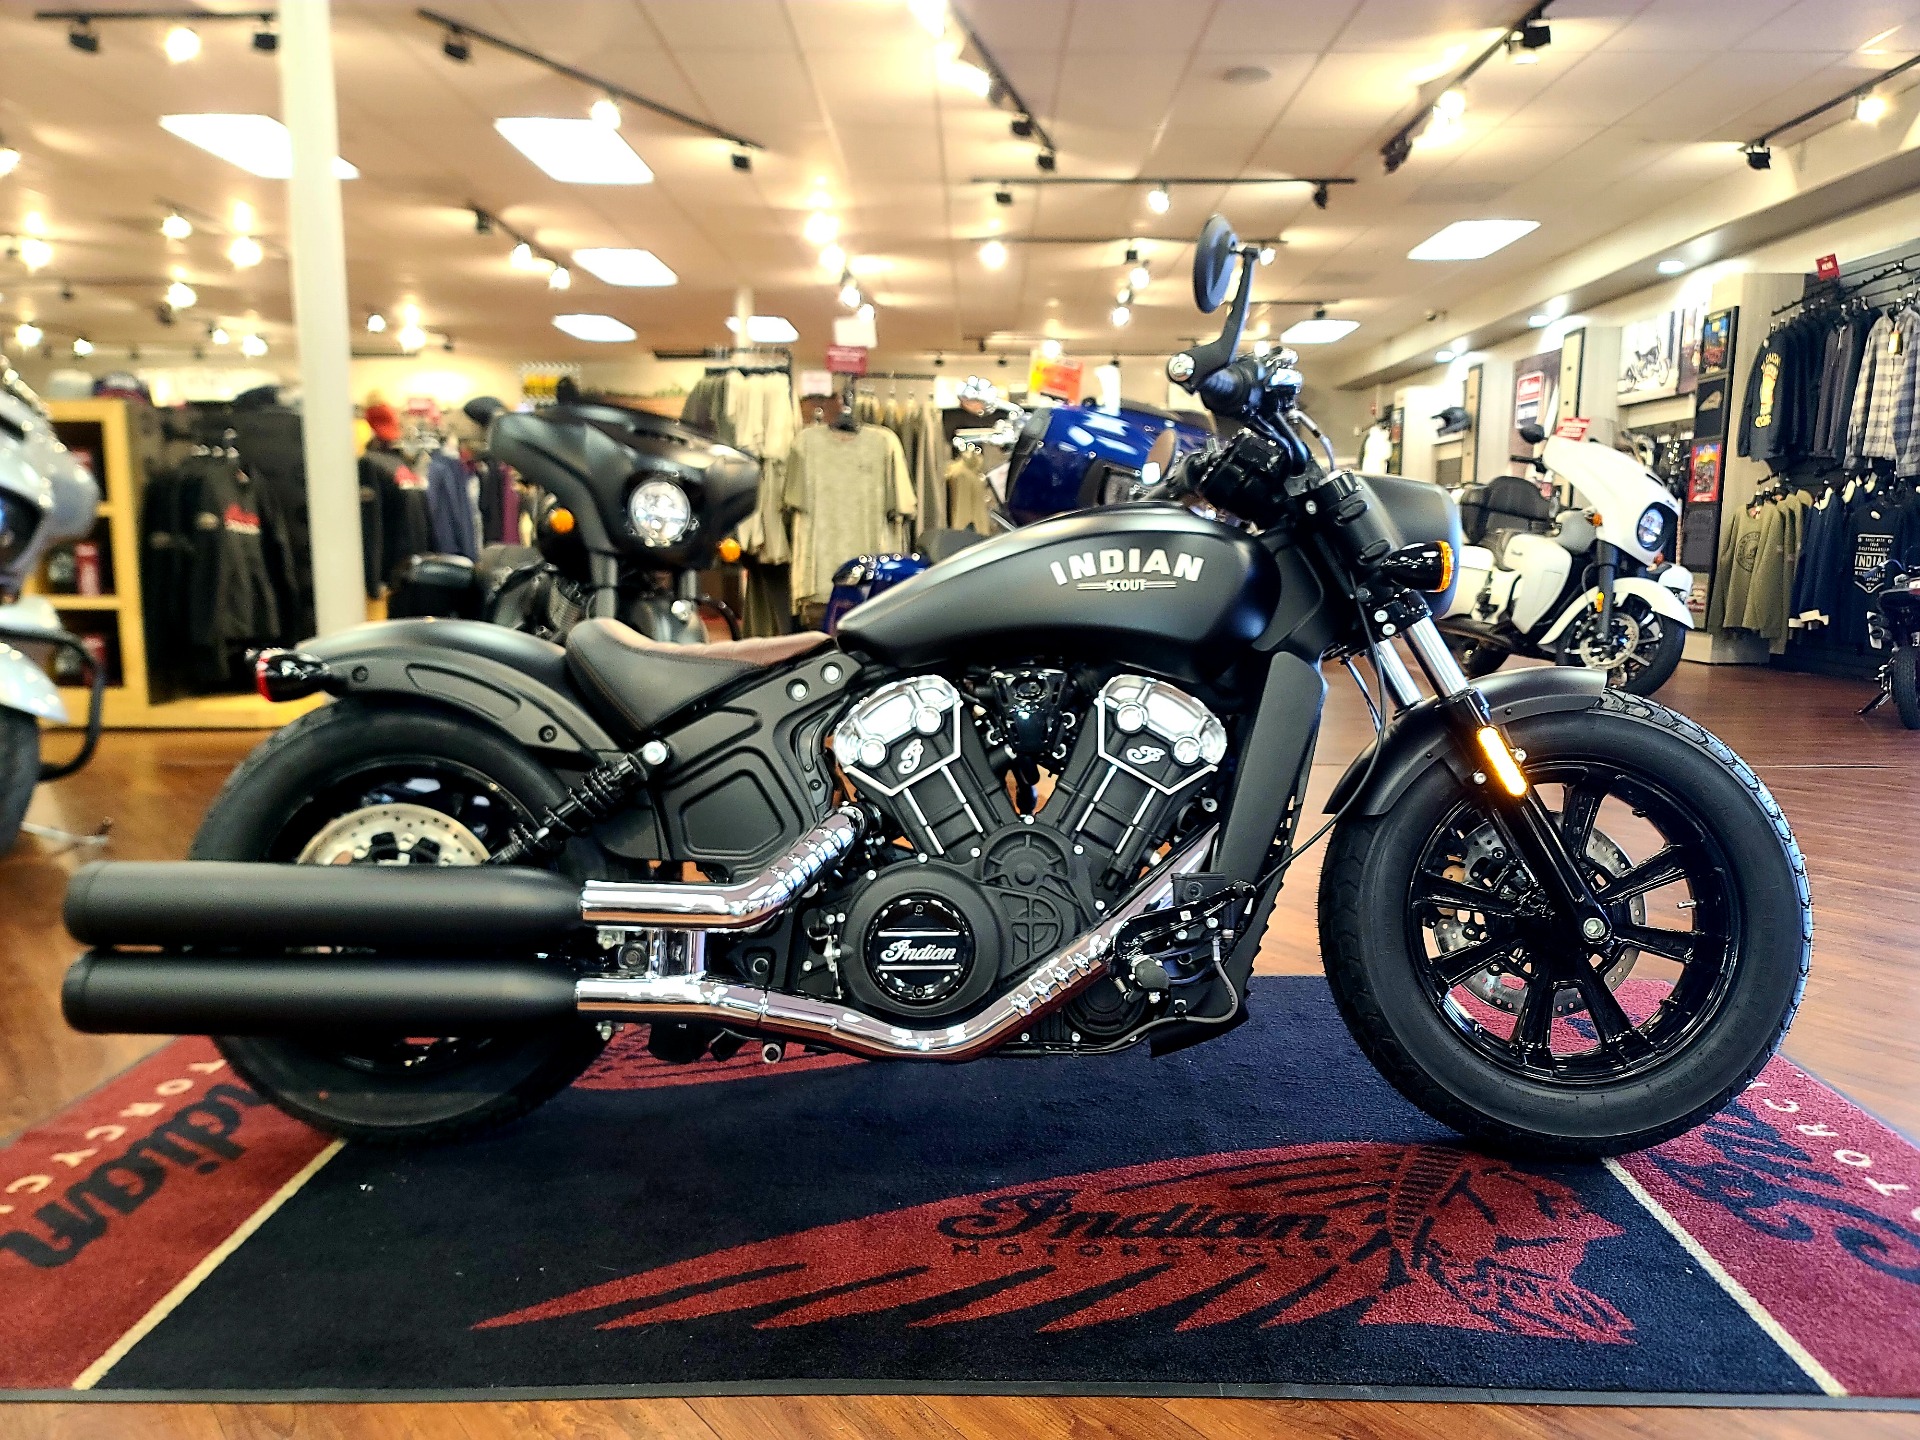 2021 Indian Scout® Bobber ABS in EL Cajon, California - Photo 2